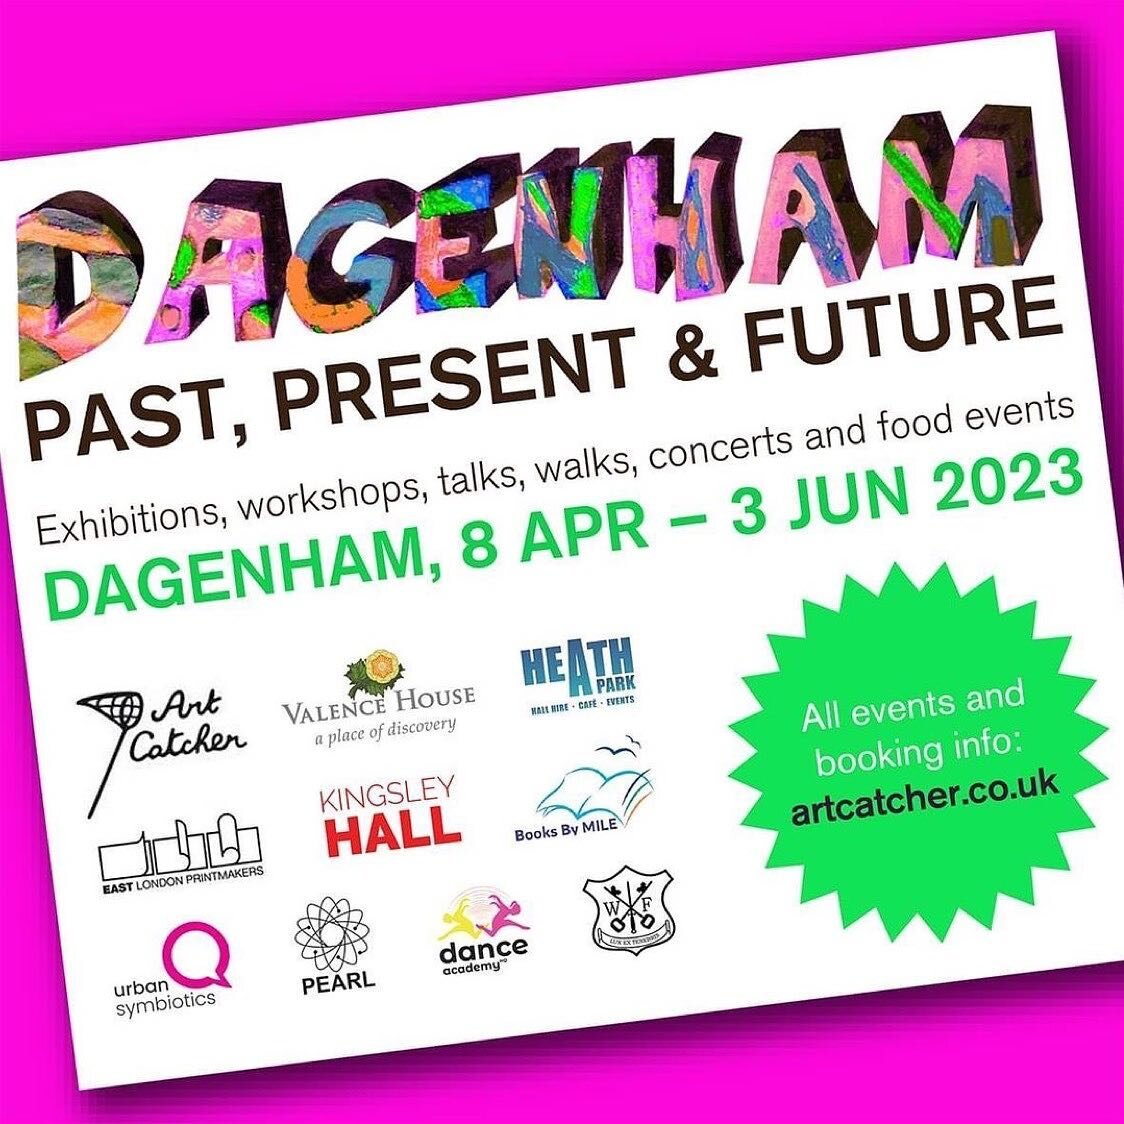 Repost from @artcatcherltd
&bull;
EXCITING TIMES! DAGENHAM: PAST, PRESENT &amp; FUTURE - Such a great, collaborative programme of events and exhibitions all for you to enjoy for free or next to nothing!
Have a good browse, and do tell all your friend